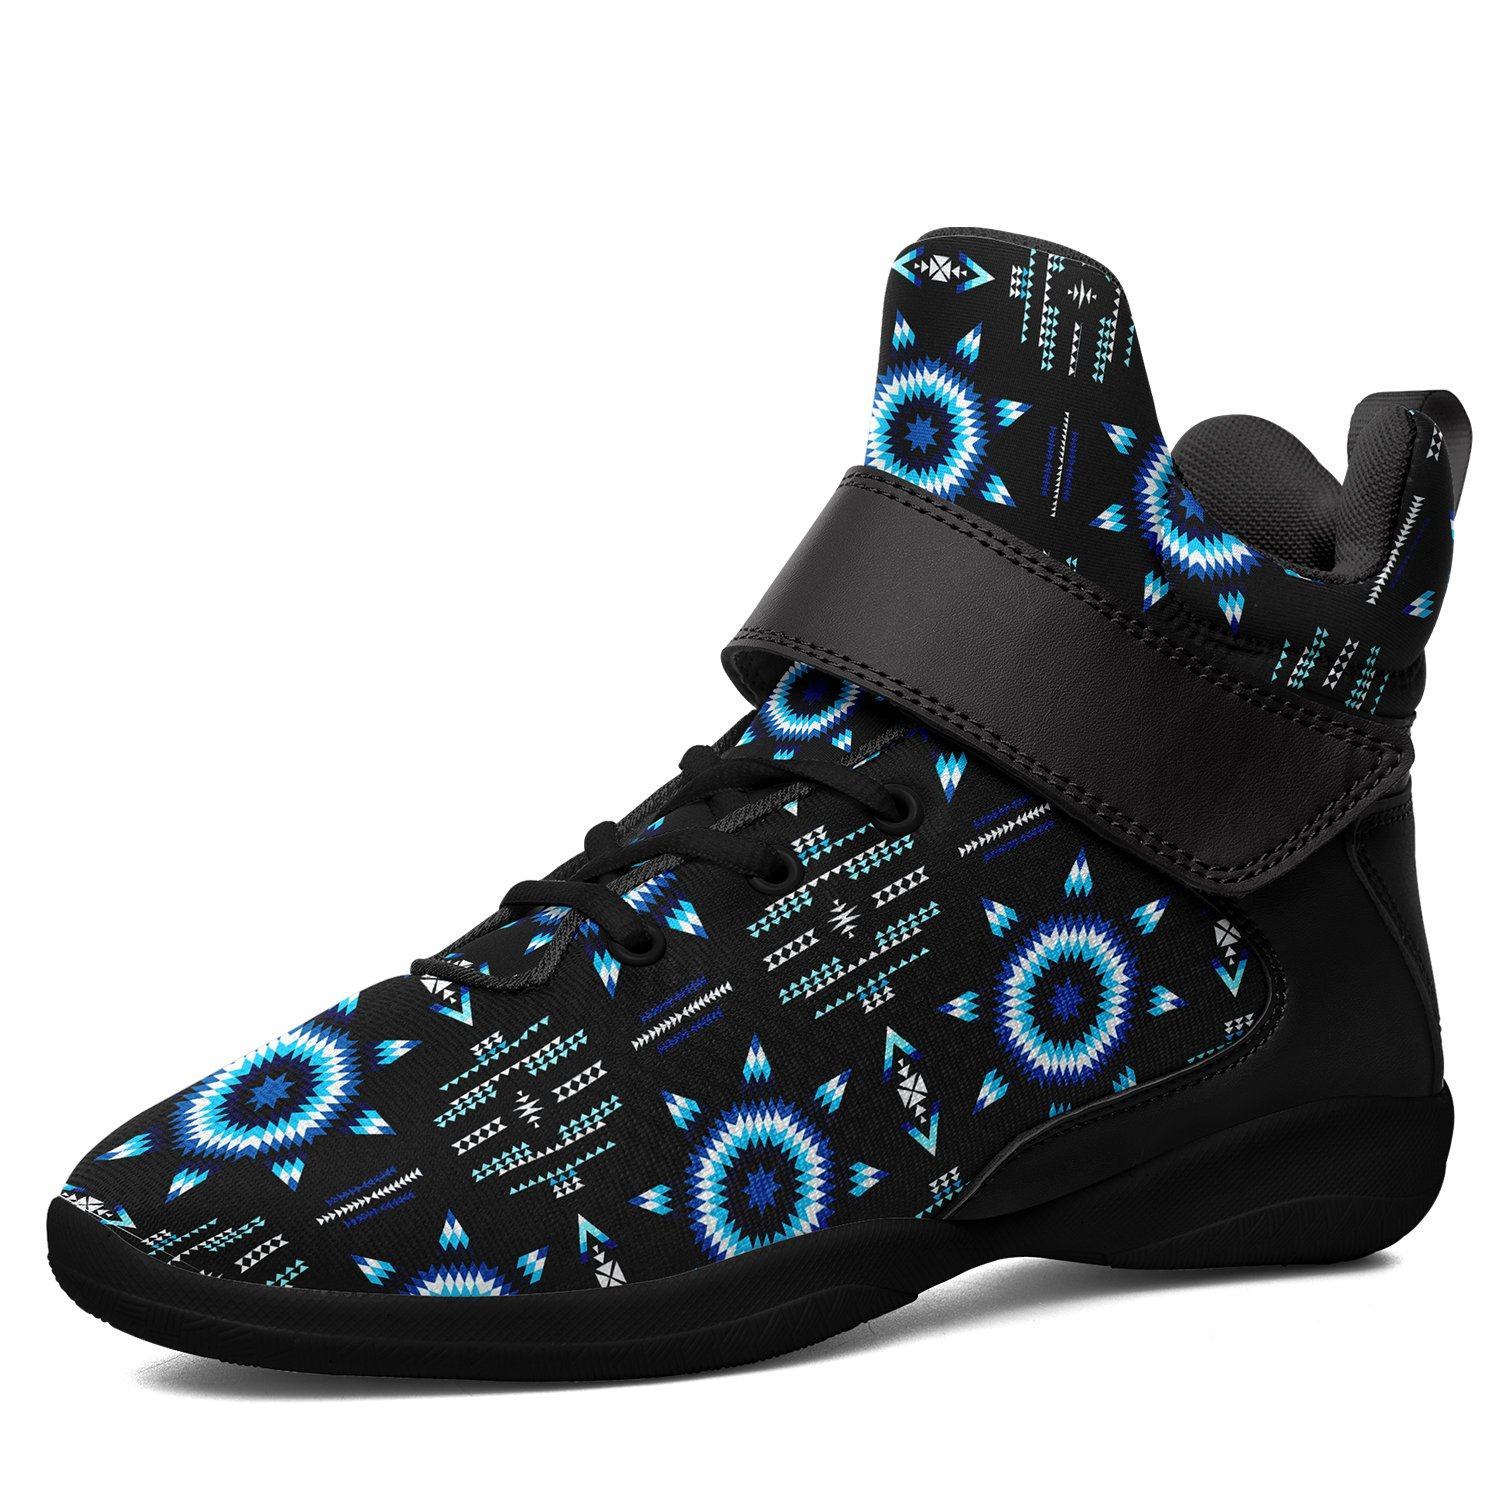 Rising Star Wolf Moon Ipottaa Basketball / Sport High Top Shoes - Black Sole 49 Dzine US Men 7 / EUR 40 Black Sole with Black Strap 